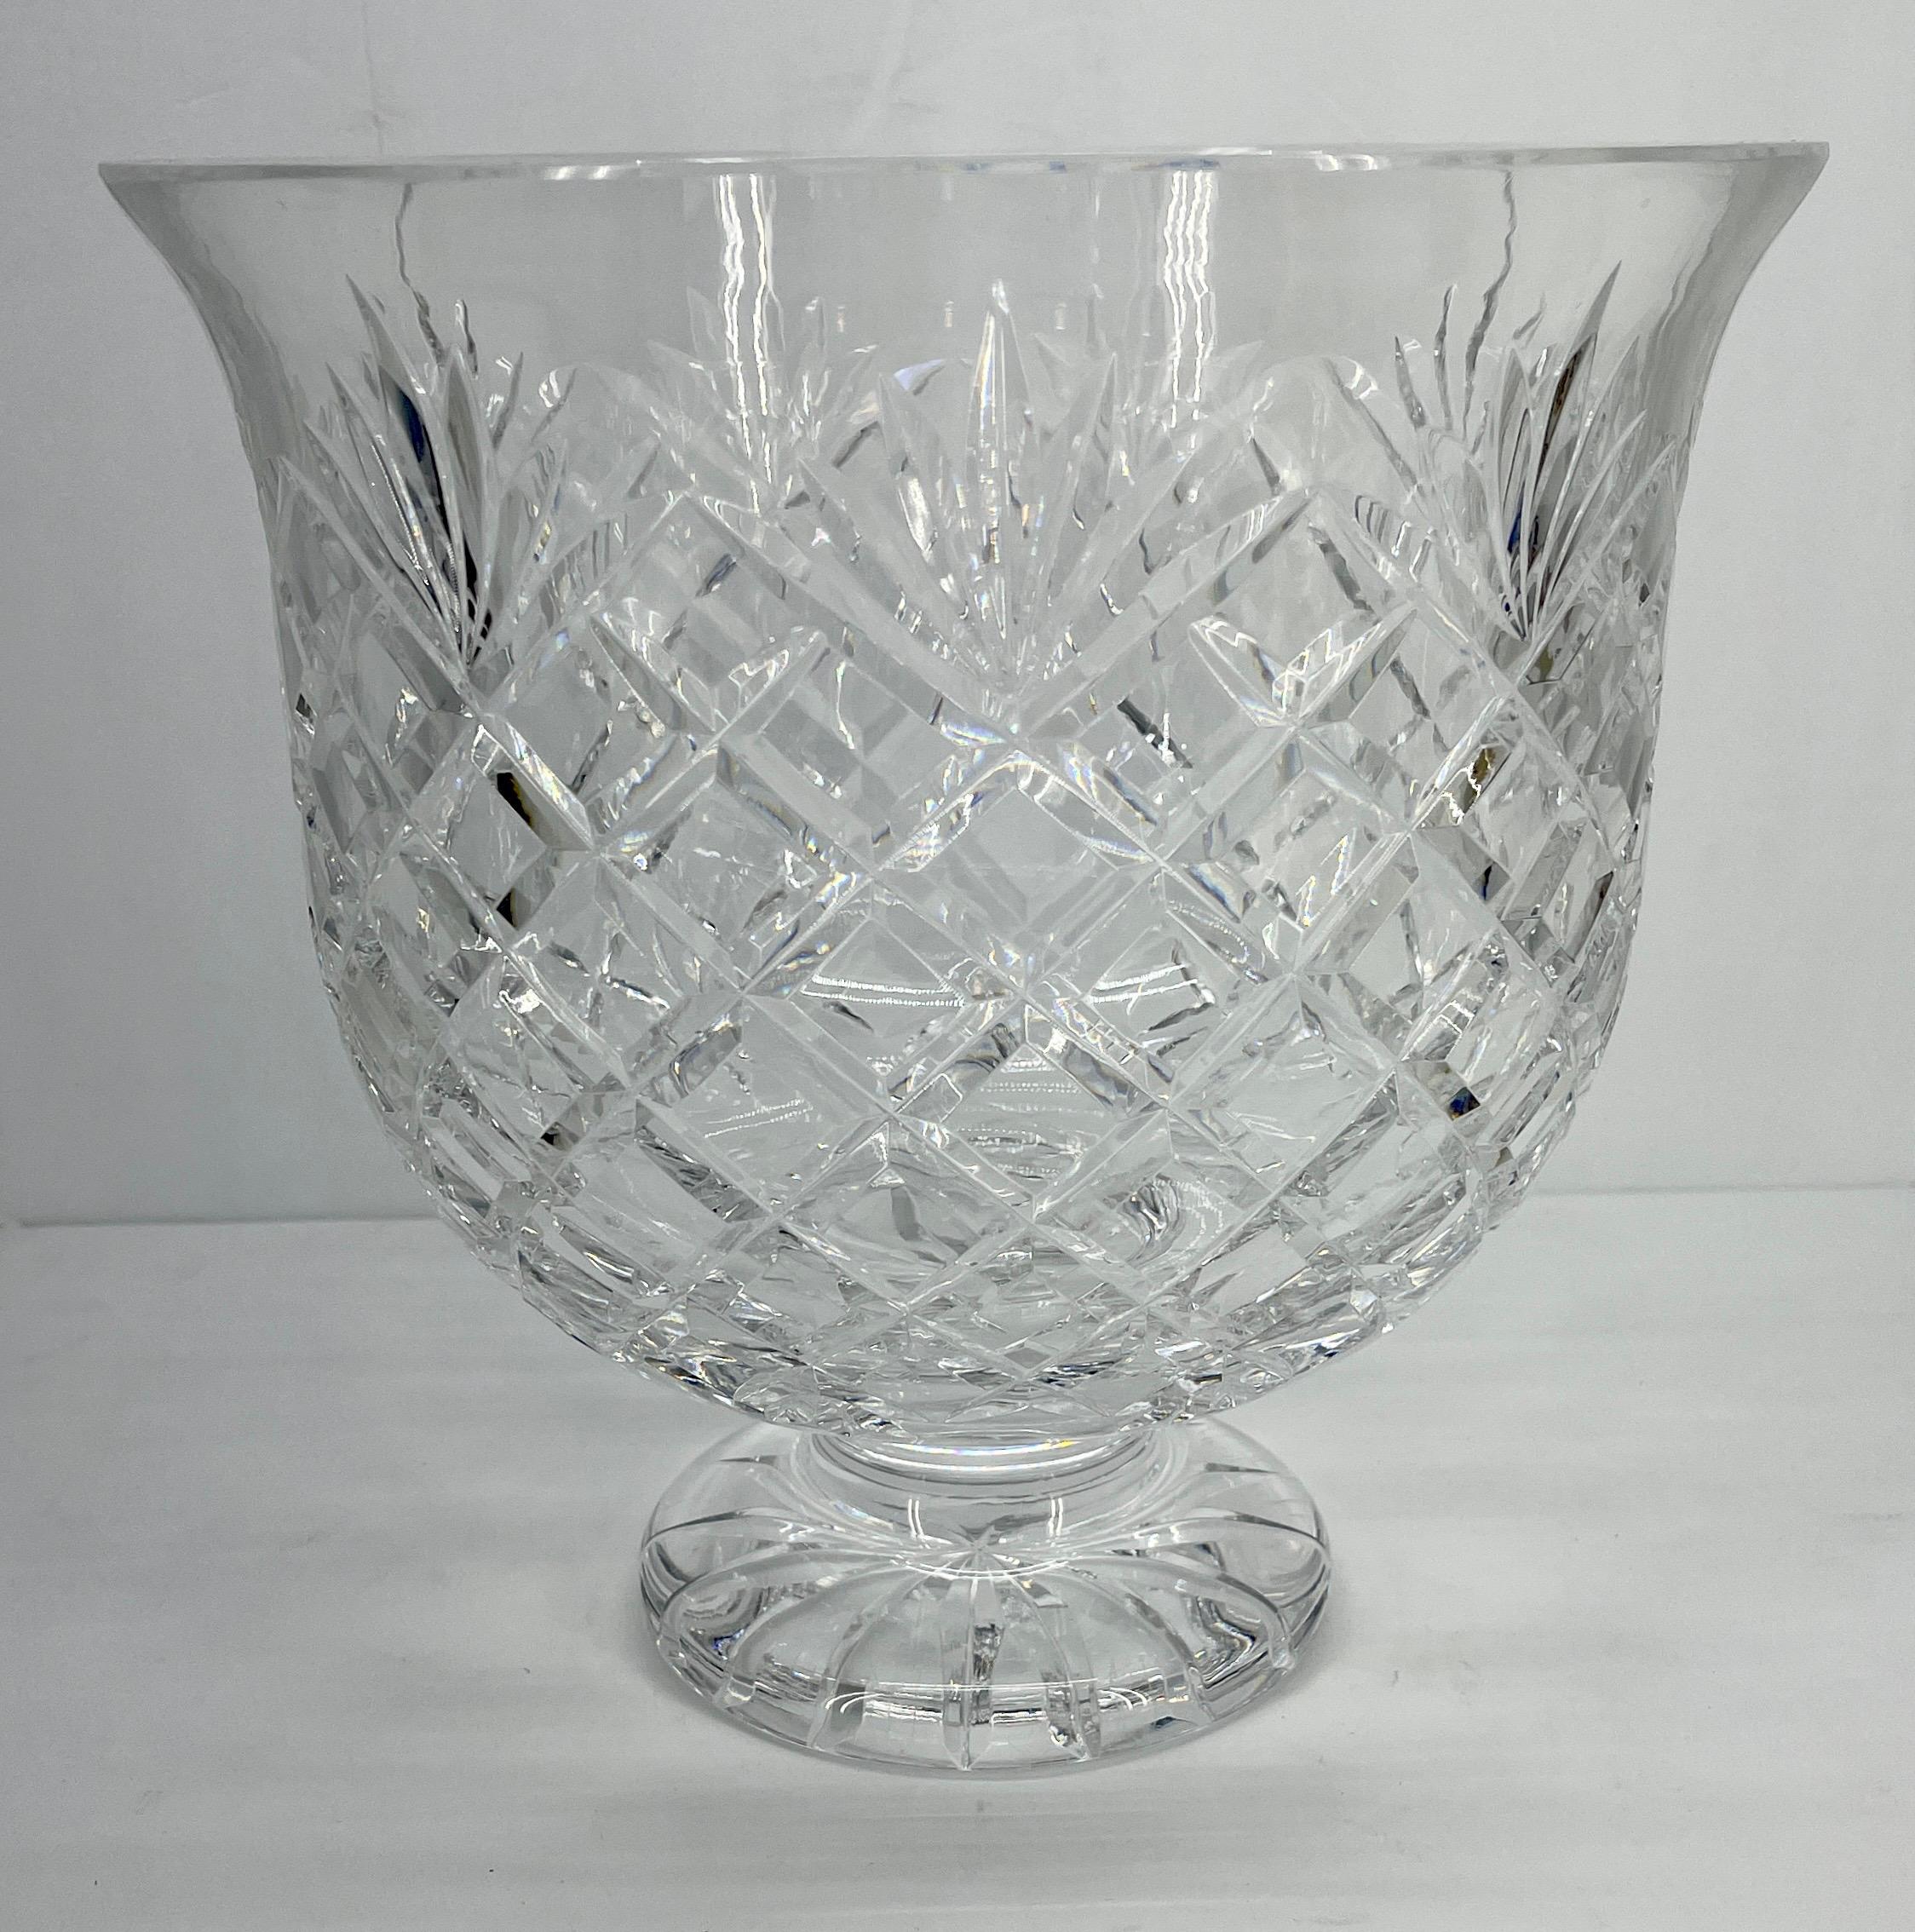 Vintage Waterford crystal bowl. Waterford is synonymous with the highest-quality Irish crystal available. Waterford chandeliers hang in places of prestige such as Windsor Castle, Westminster Abbey and the Kennedy Center in Washington, D.C. And who